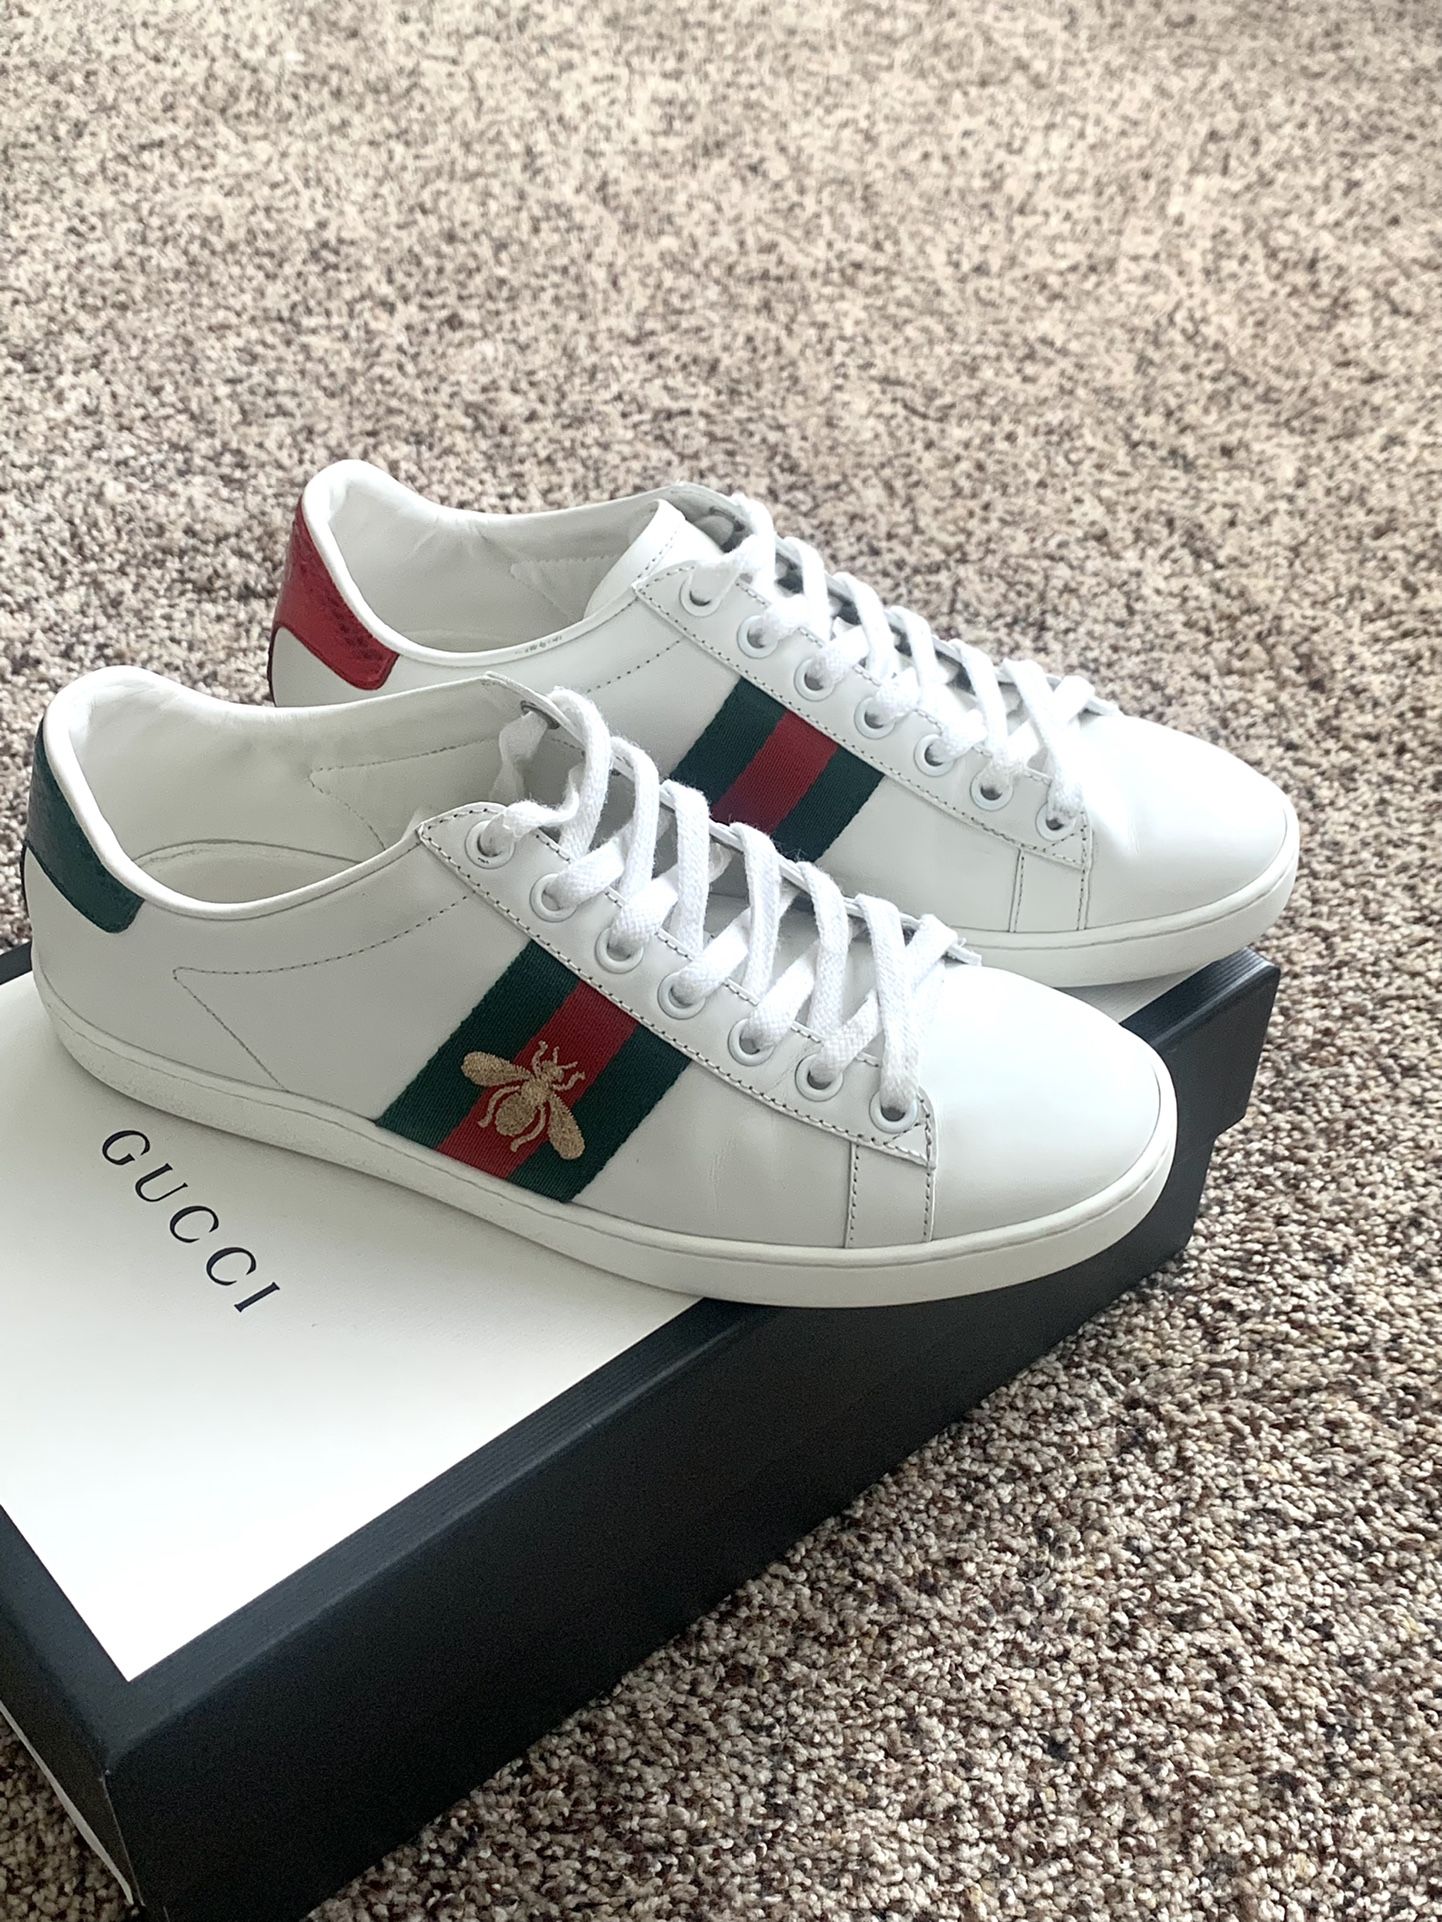 Gucci Woman’s Ace Sneakers 